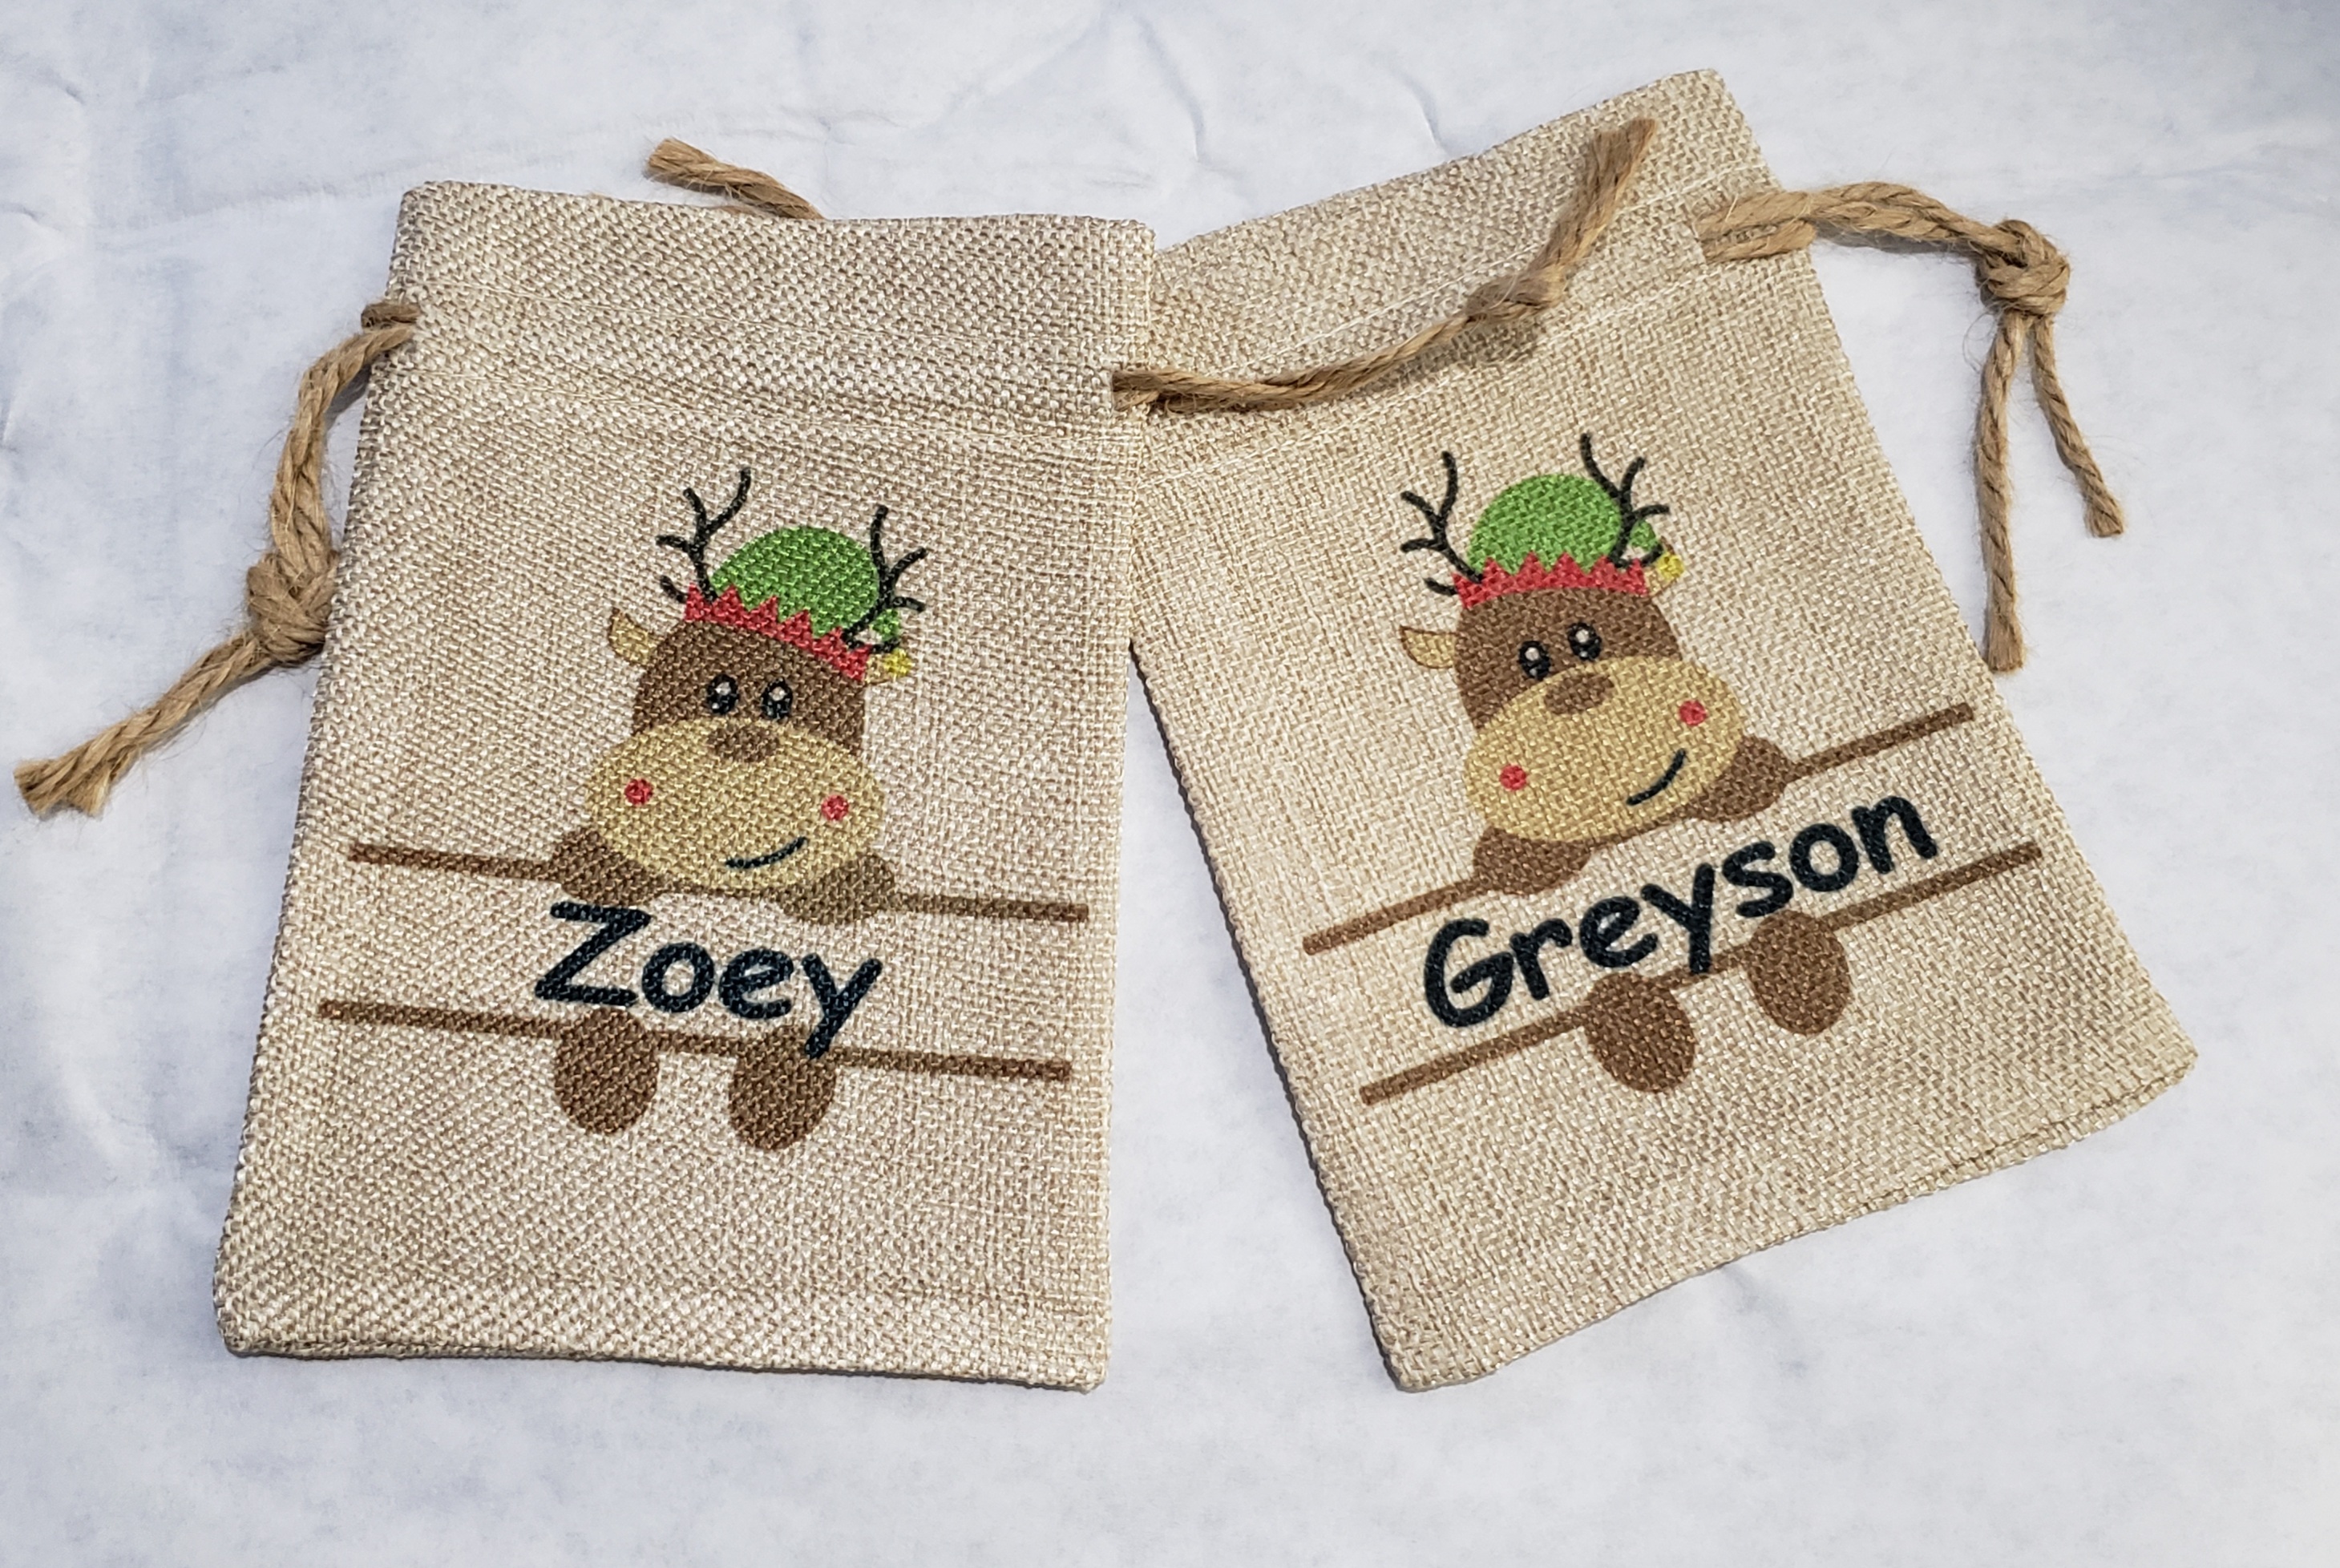 These bags were made for a teacher to give each student at Christmas time. They were a hit with